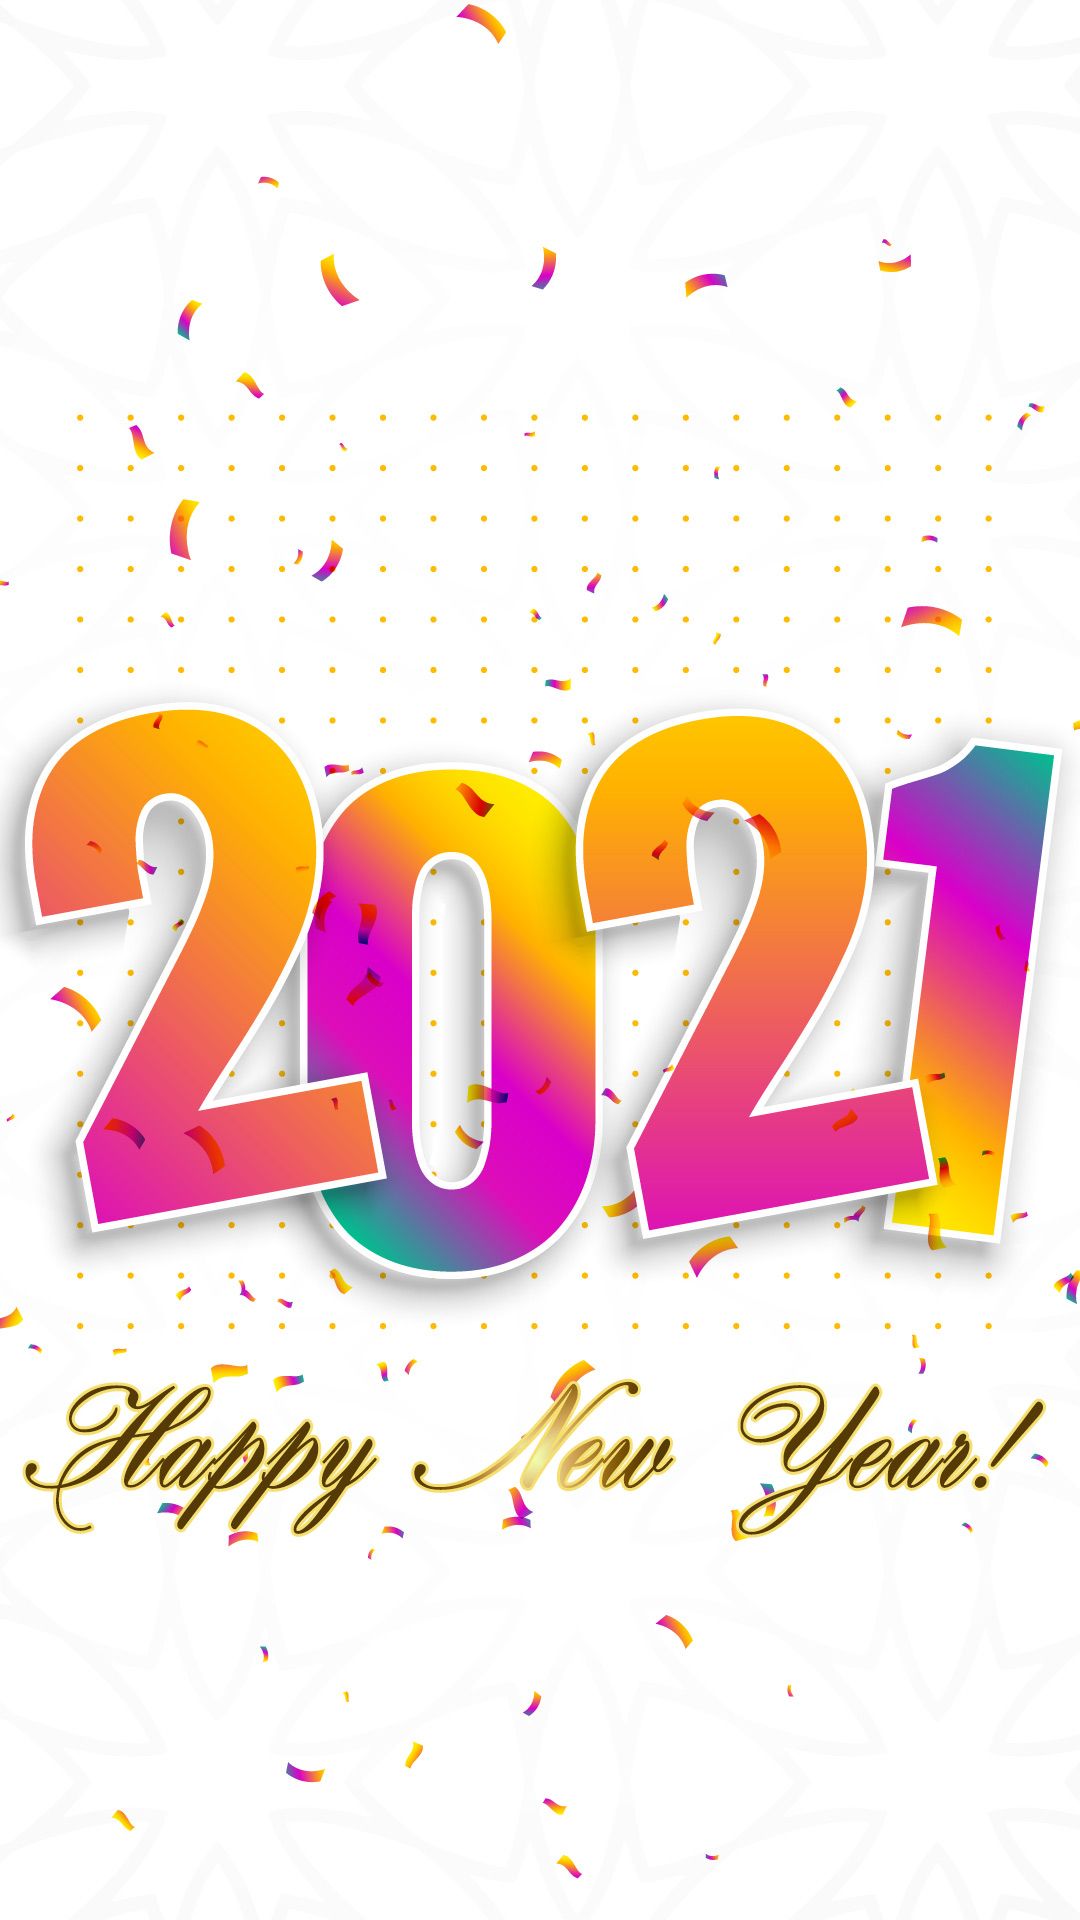 Happy New Year 2021 Full Screen Wallpapers - Wallpaper Cave